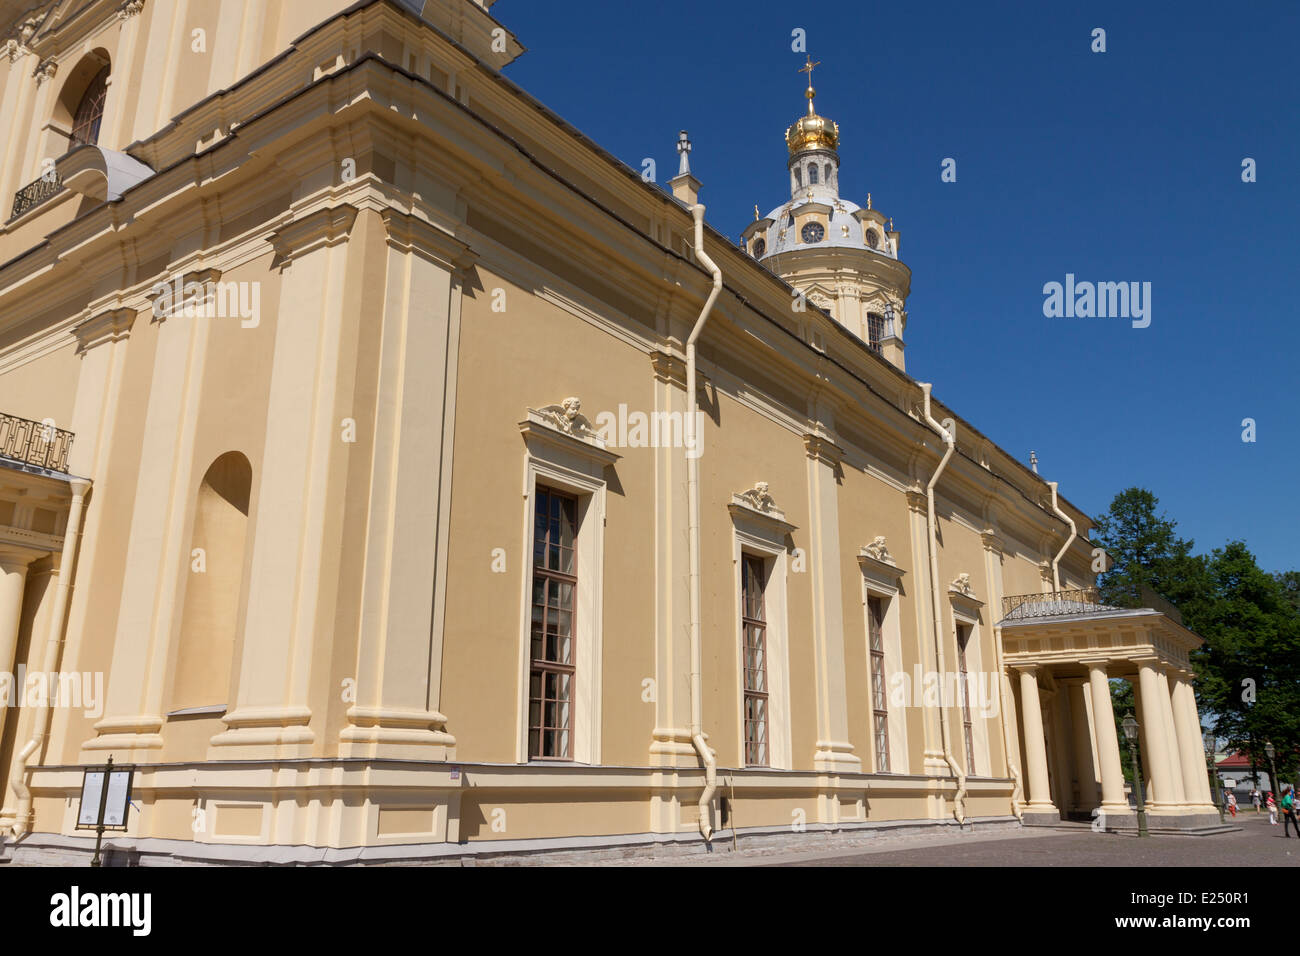 The Cathedral of SS Peter and Paul in the Peter and Paul Fortress St Petersburg Russia Stock Photo